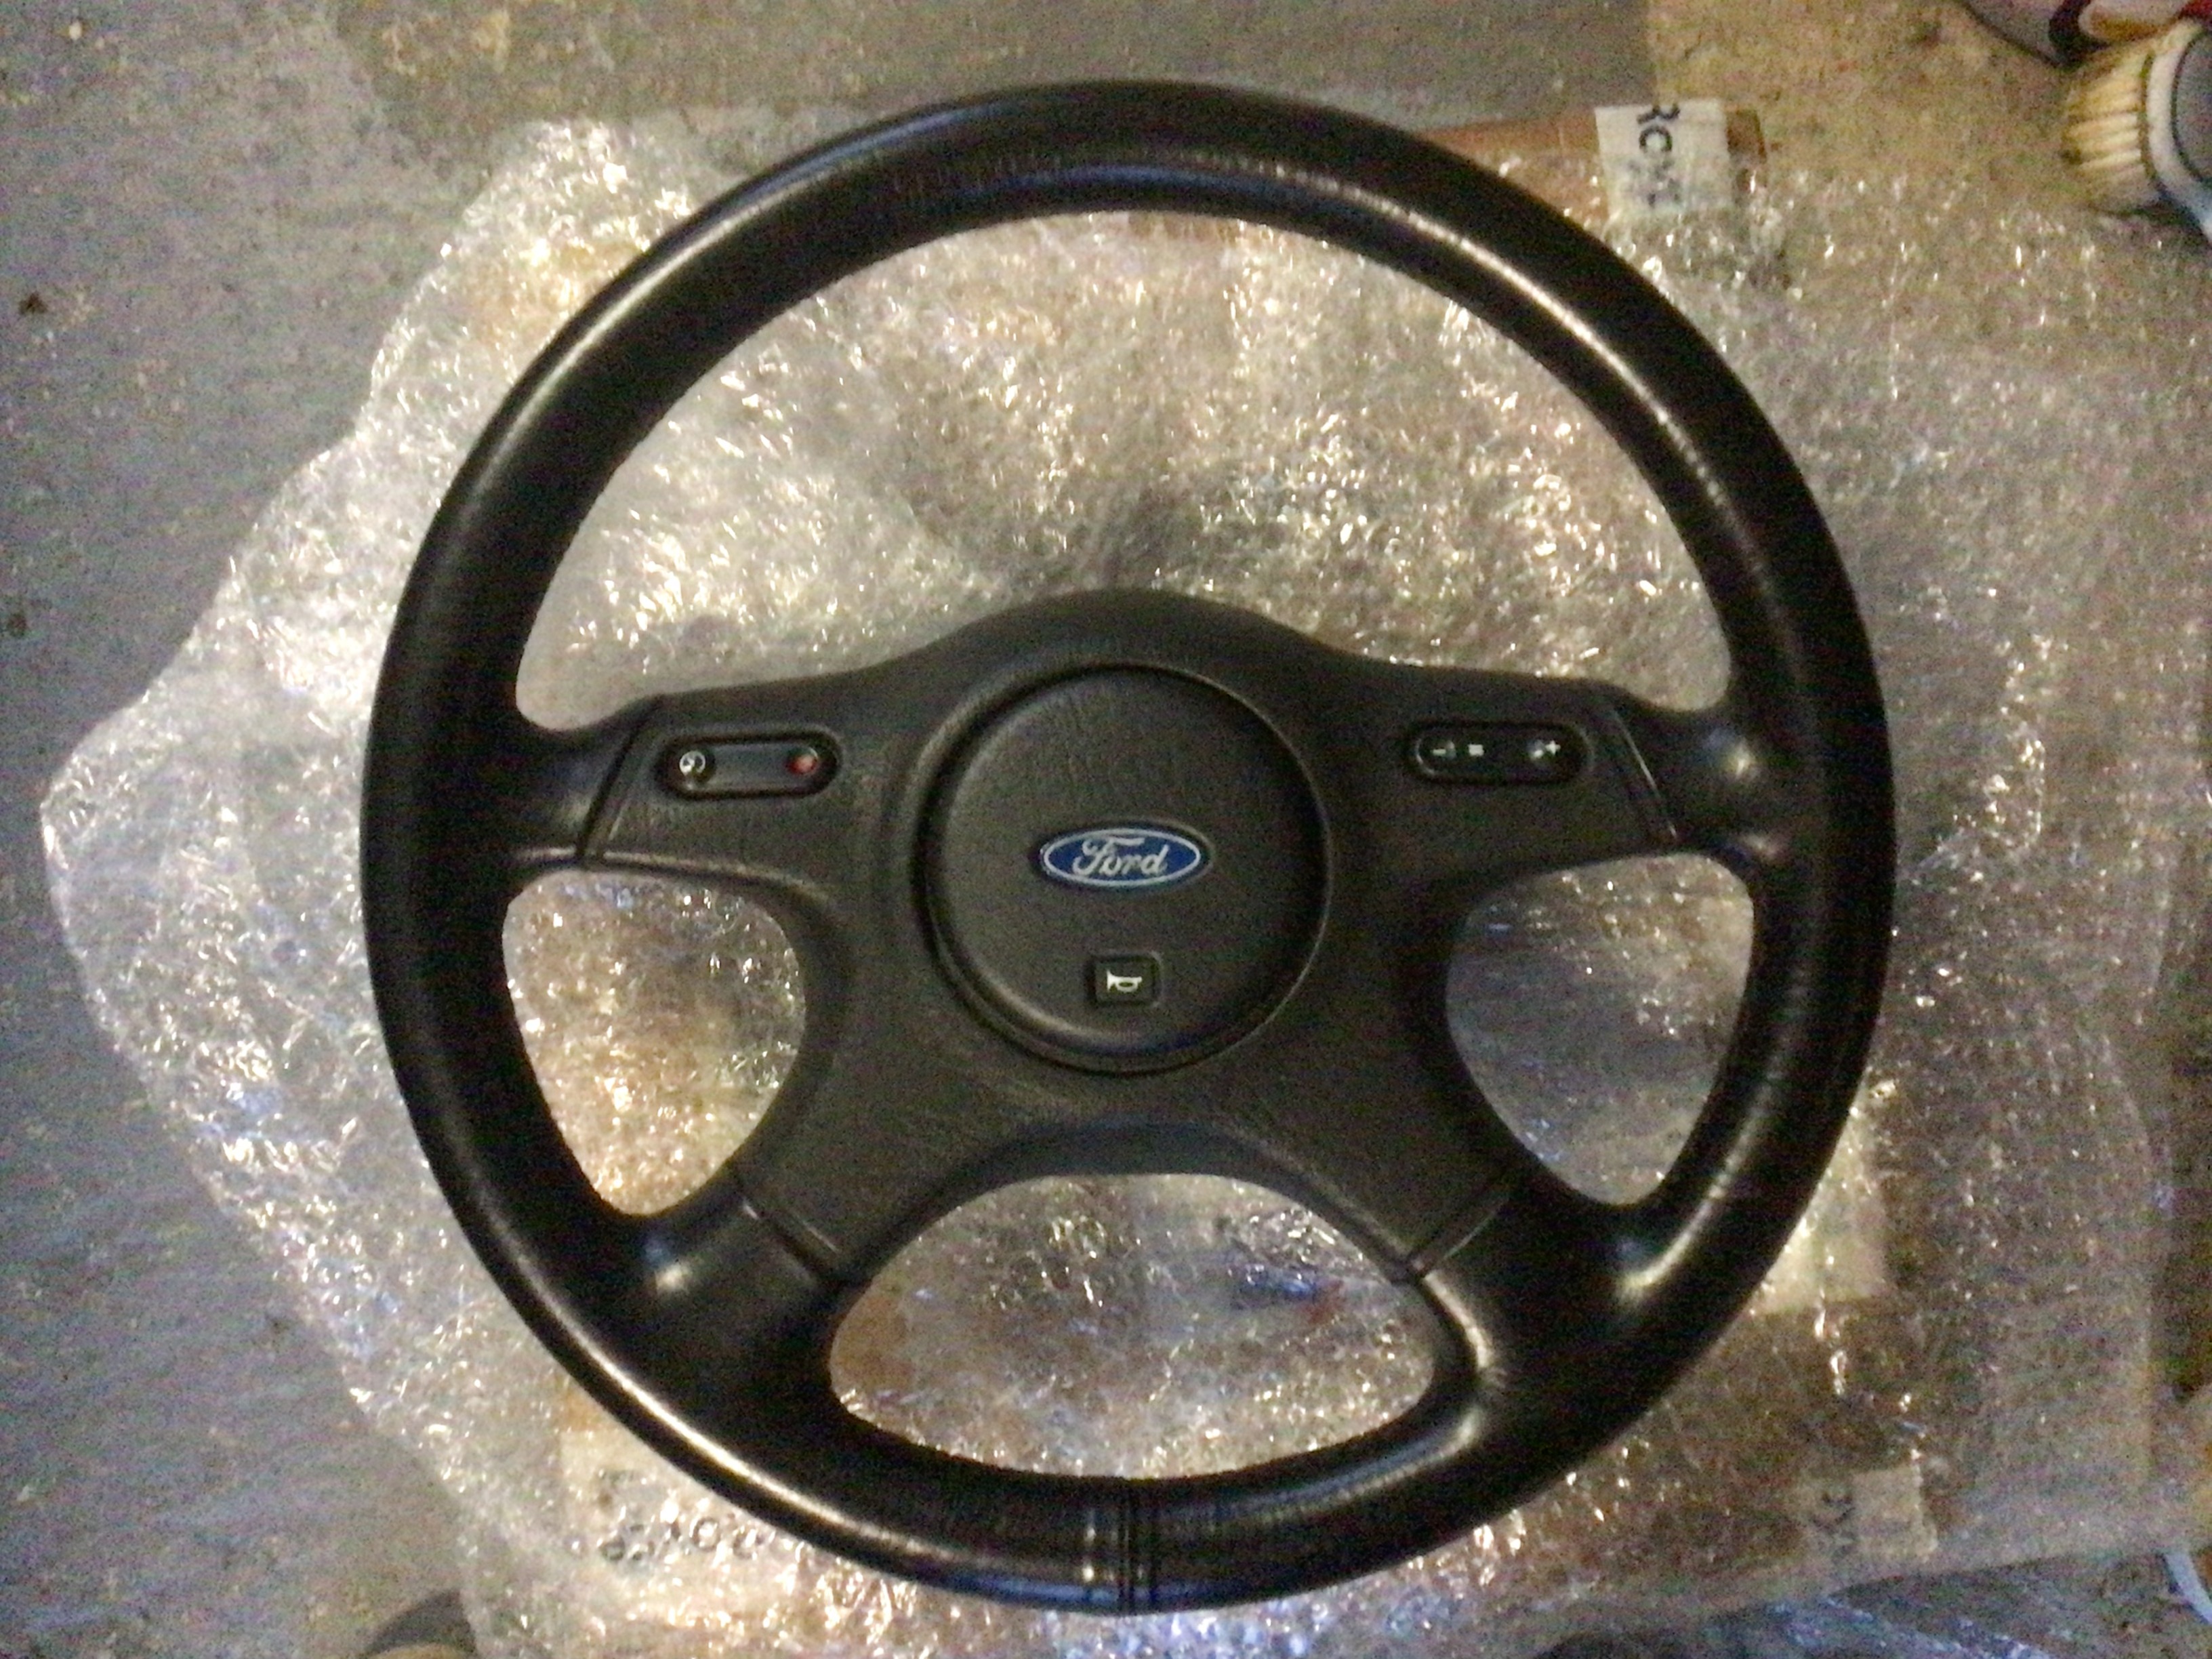 Ford Granada - Attainable 90s Interesting Ford - Page 2 - Readers' Cars - PistonHeads UK - The image shows a black steering wheel with a silver center and the Ford logo. It is placed inside a transparent protective bag, which is situated on a surface that appears to be carpeted. The car's dashboard or a similar part of the vehicle is visible around the steering wheel. In the background, there's a glimpse of another object wrapped in plastic, suggesting this might be a storage area for car parts.